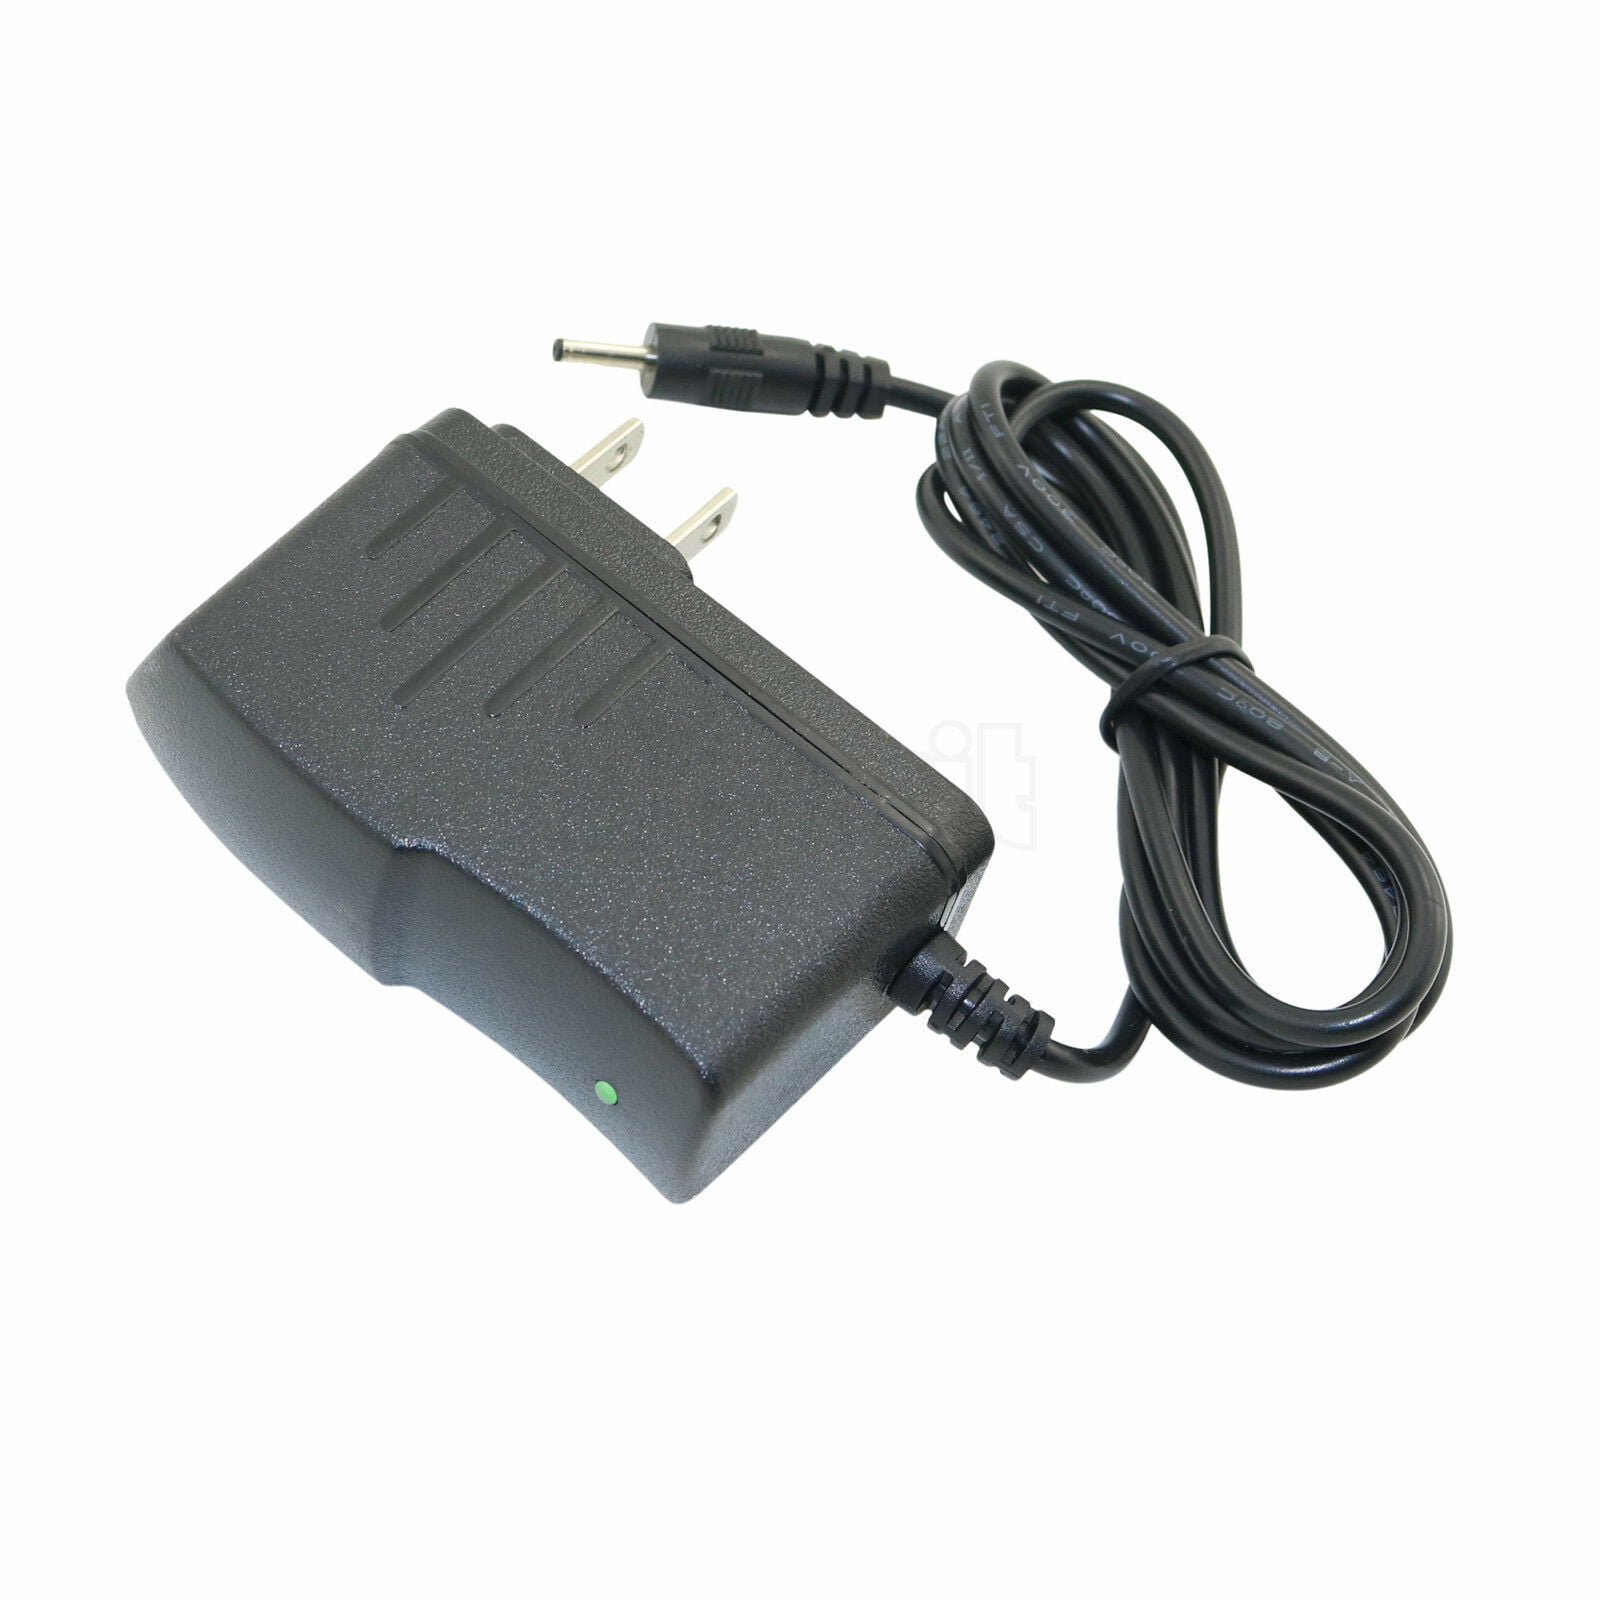 AC/DC Power Adapter Wall Charger USB Cord for Polaroid Internet Tablet S10 bk 